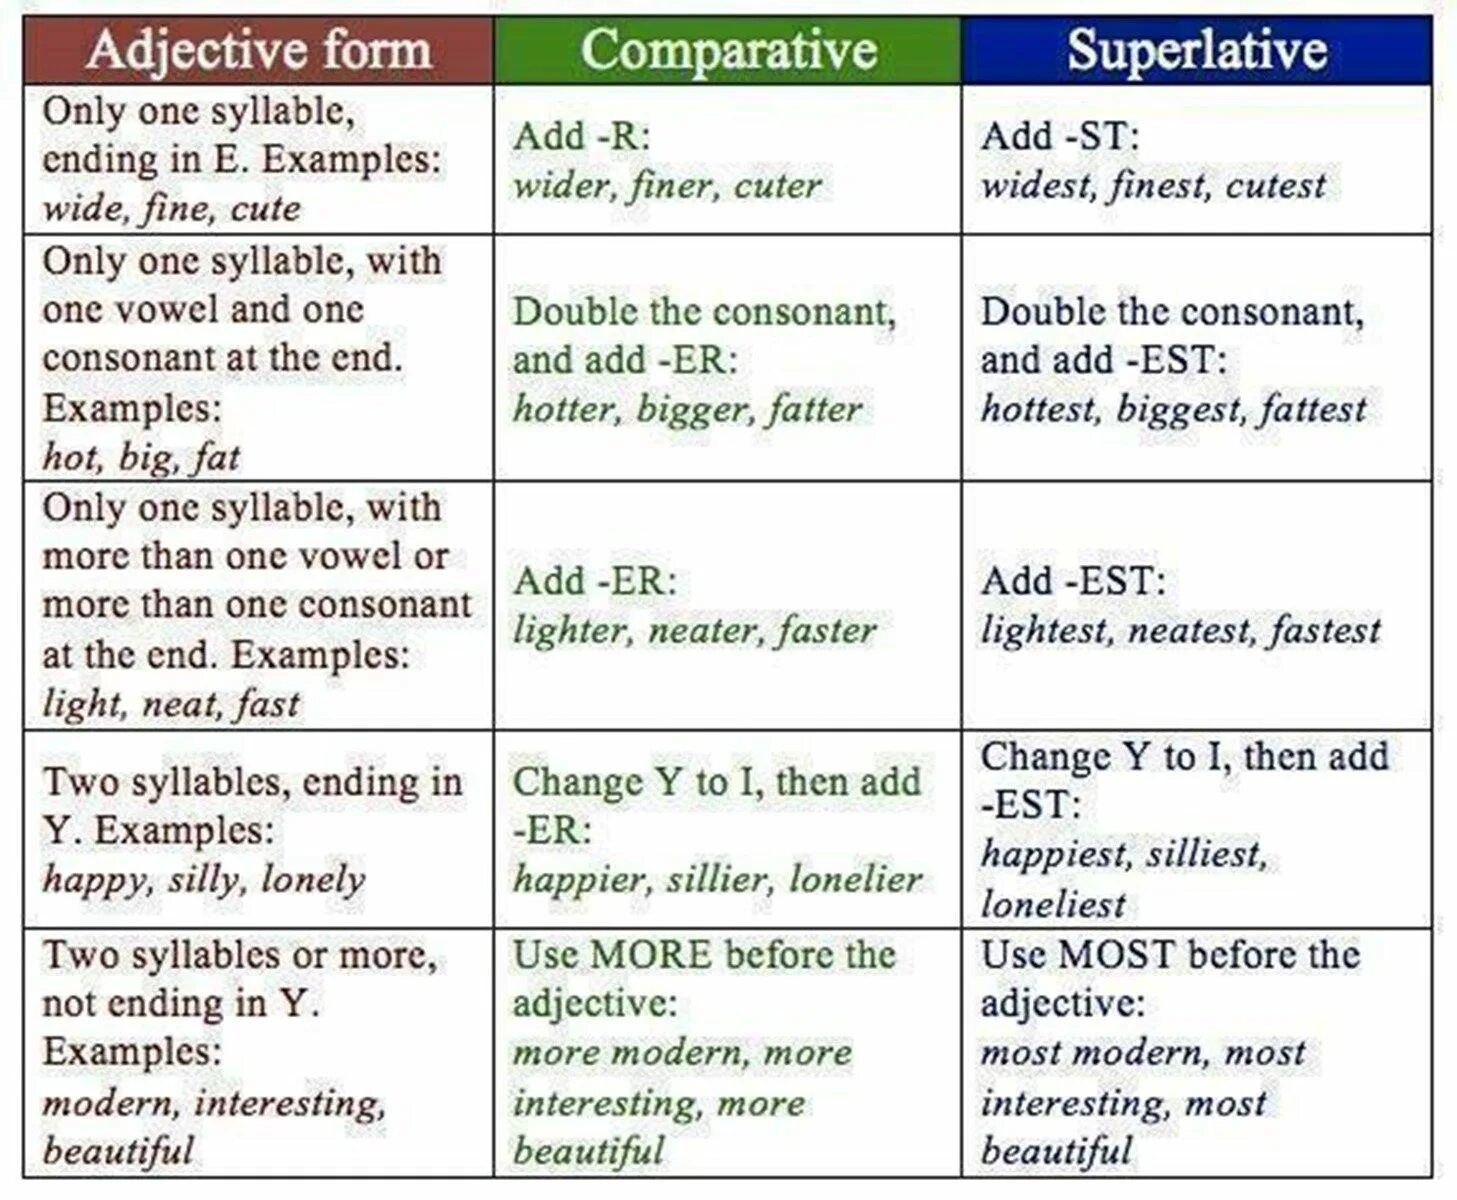 Comparatives and Superlatives правило таблица. Adjective Comparative Superlative таблица. Английский Comparative and Superlative. Таблица Comparative and Superlative. Adjective примеры